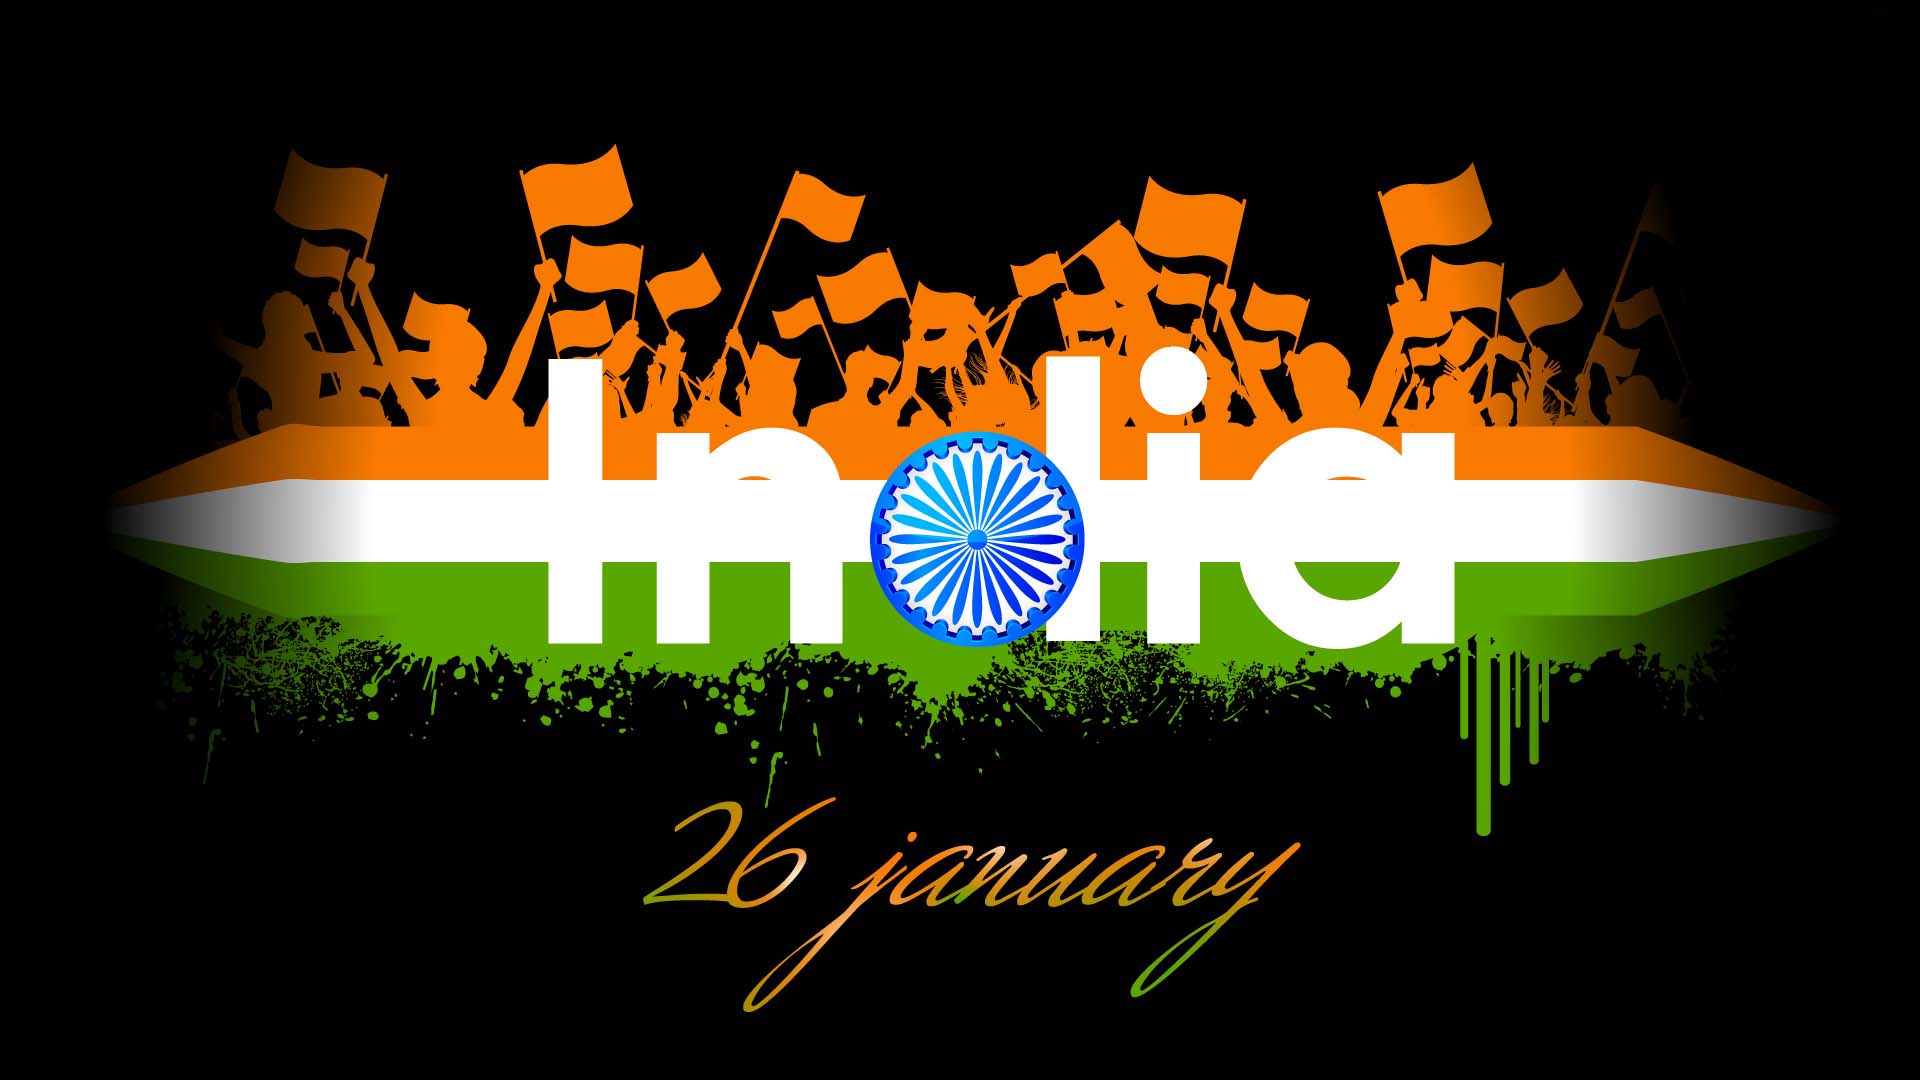 Indian Flag Wallpapers Hd Images For 26 Jan Free Download 8 Polesmag